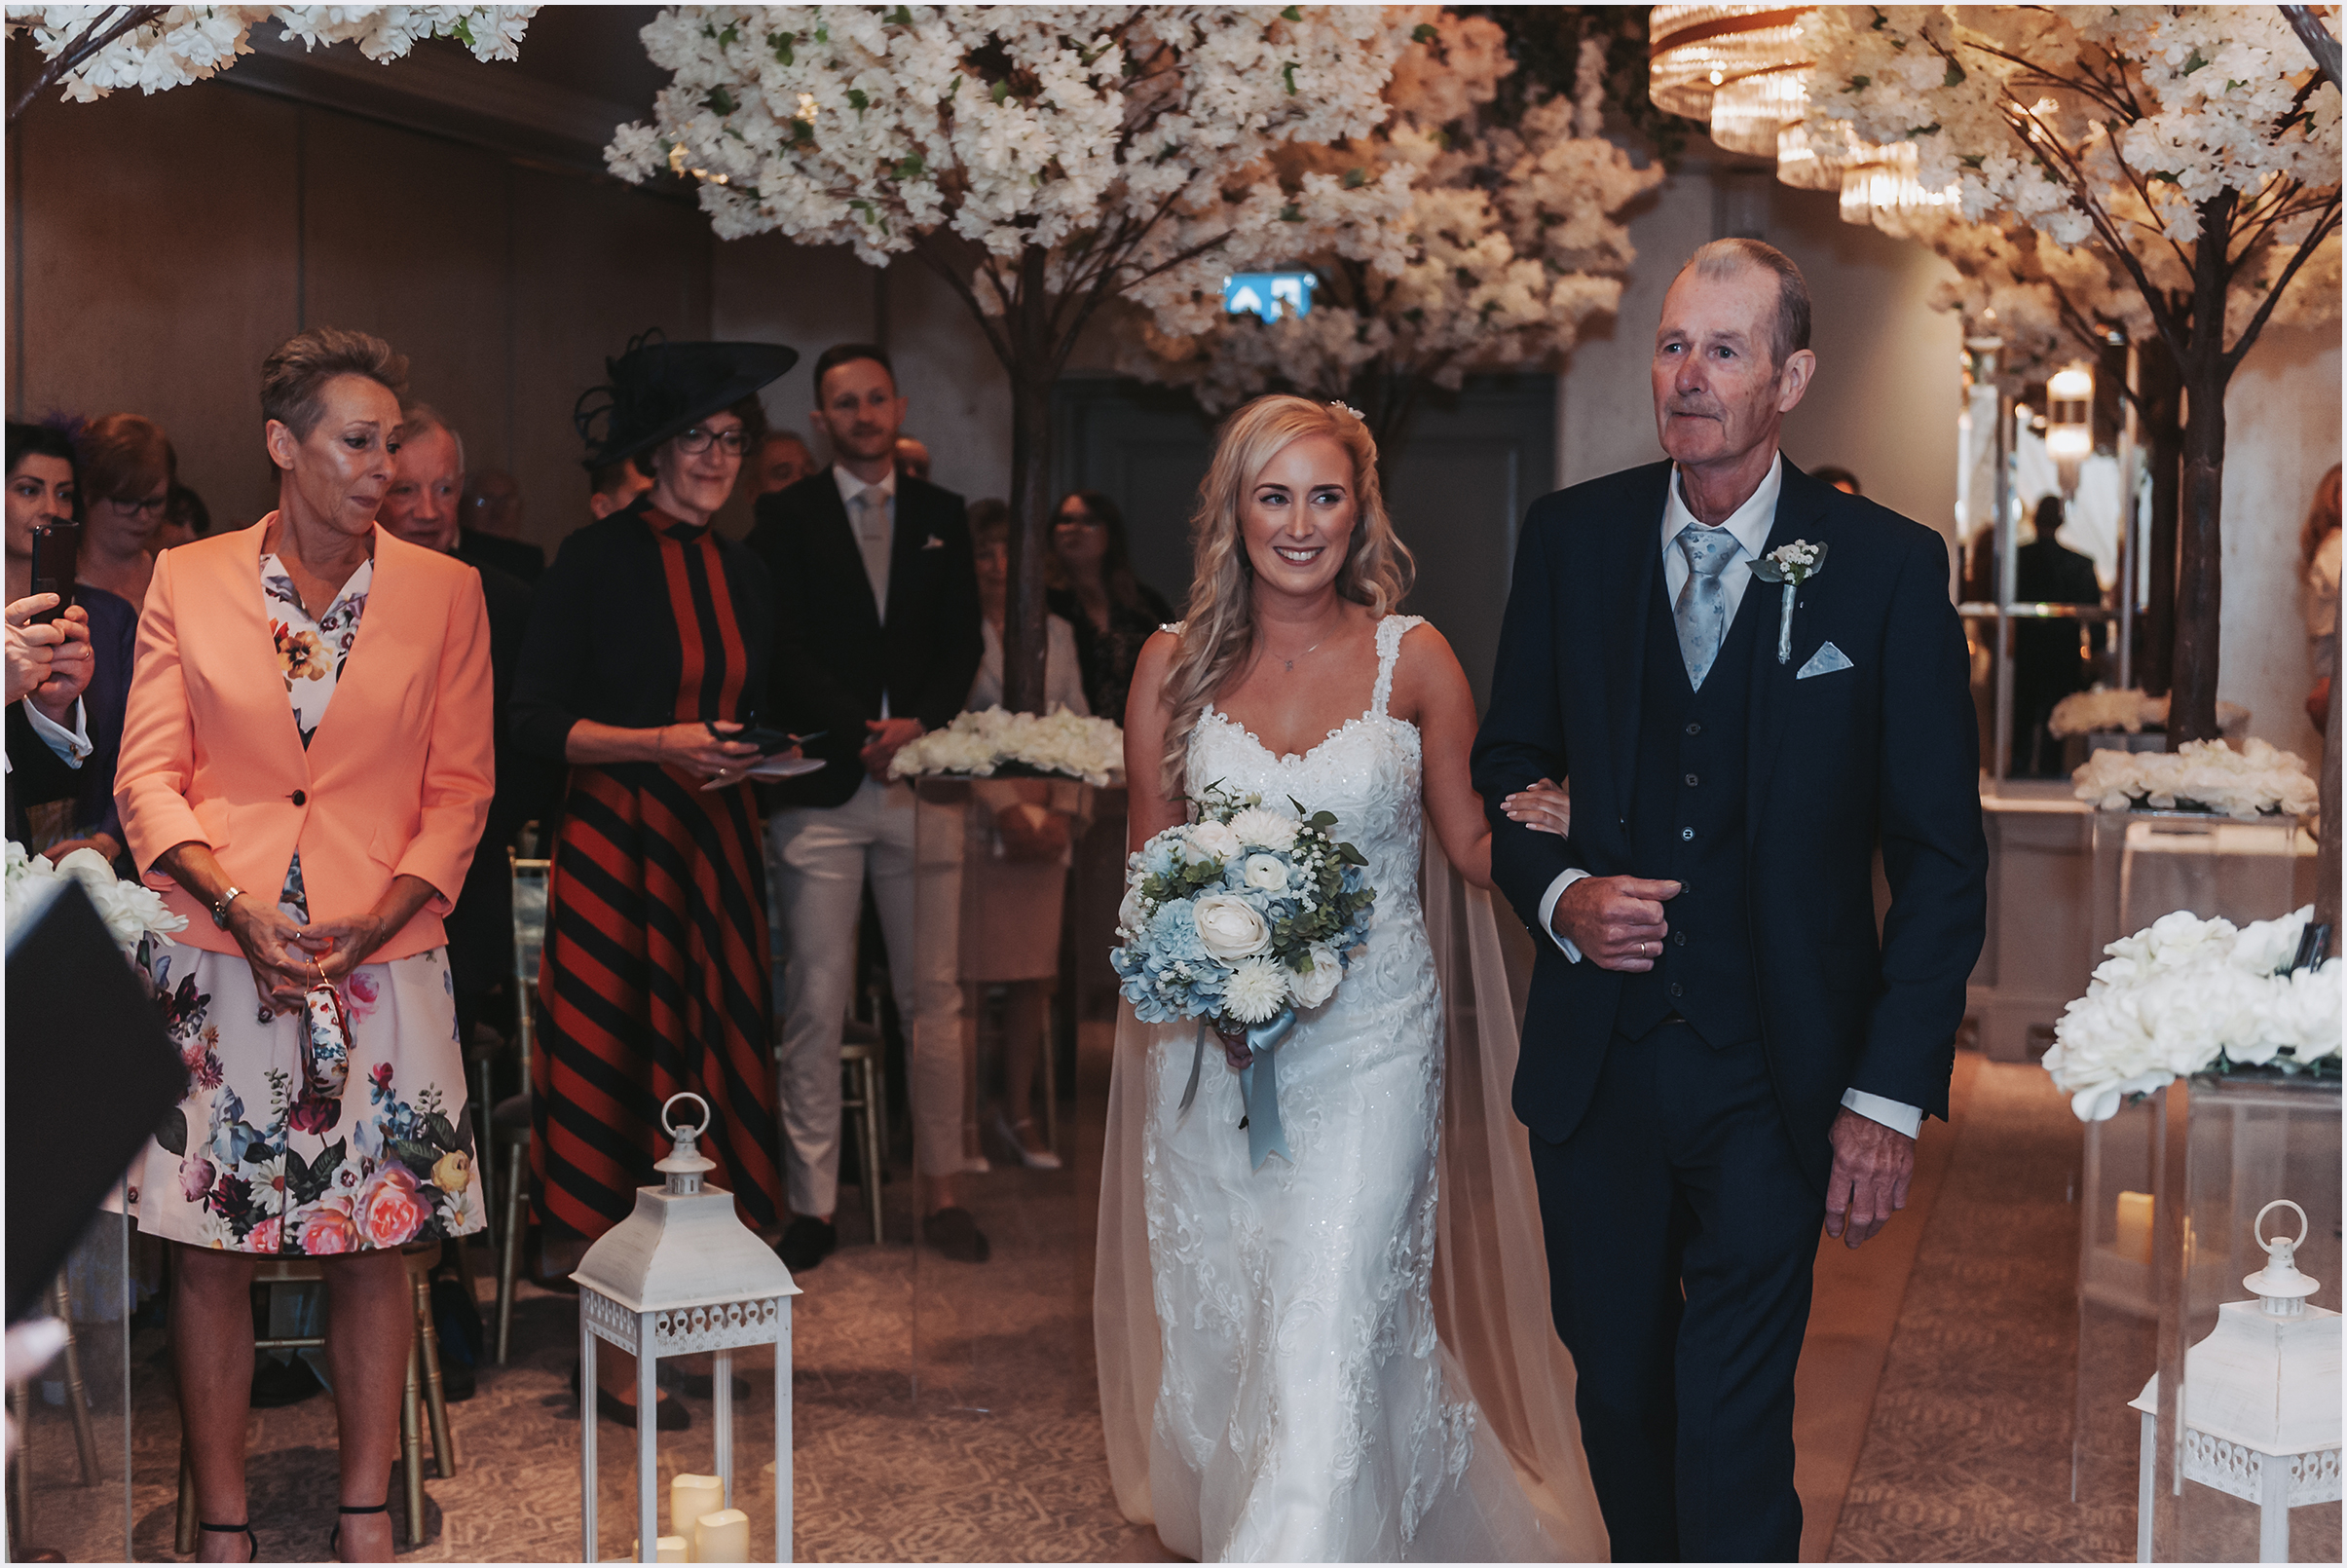 A bride with her hand linking her father's arm walking down the aisle during her wedding ceremony at The Grosvenor Pulford Hotel and Spa